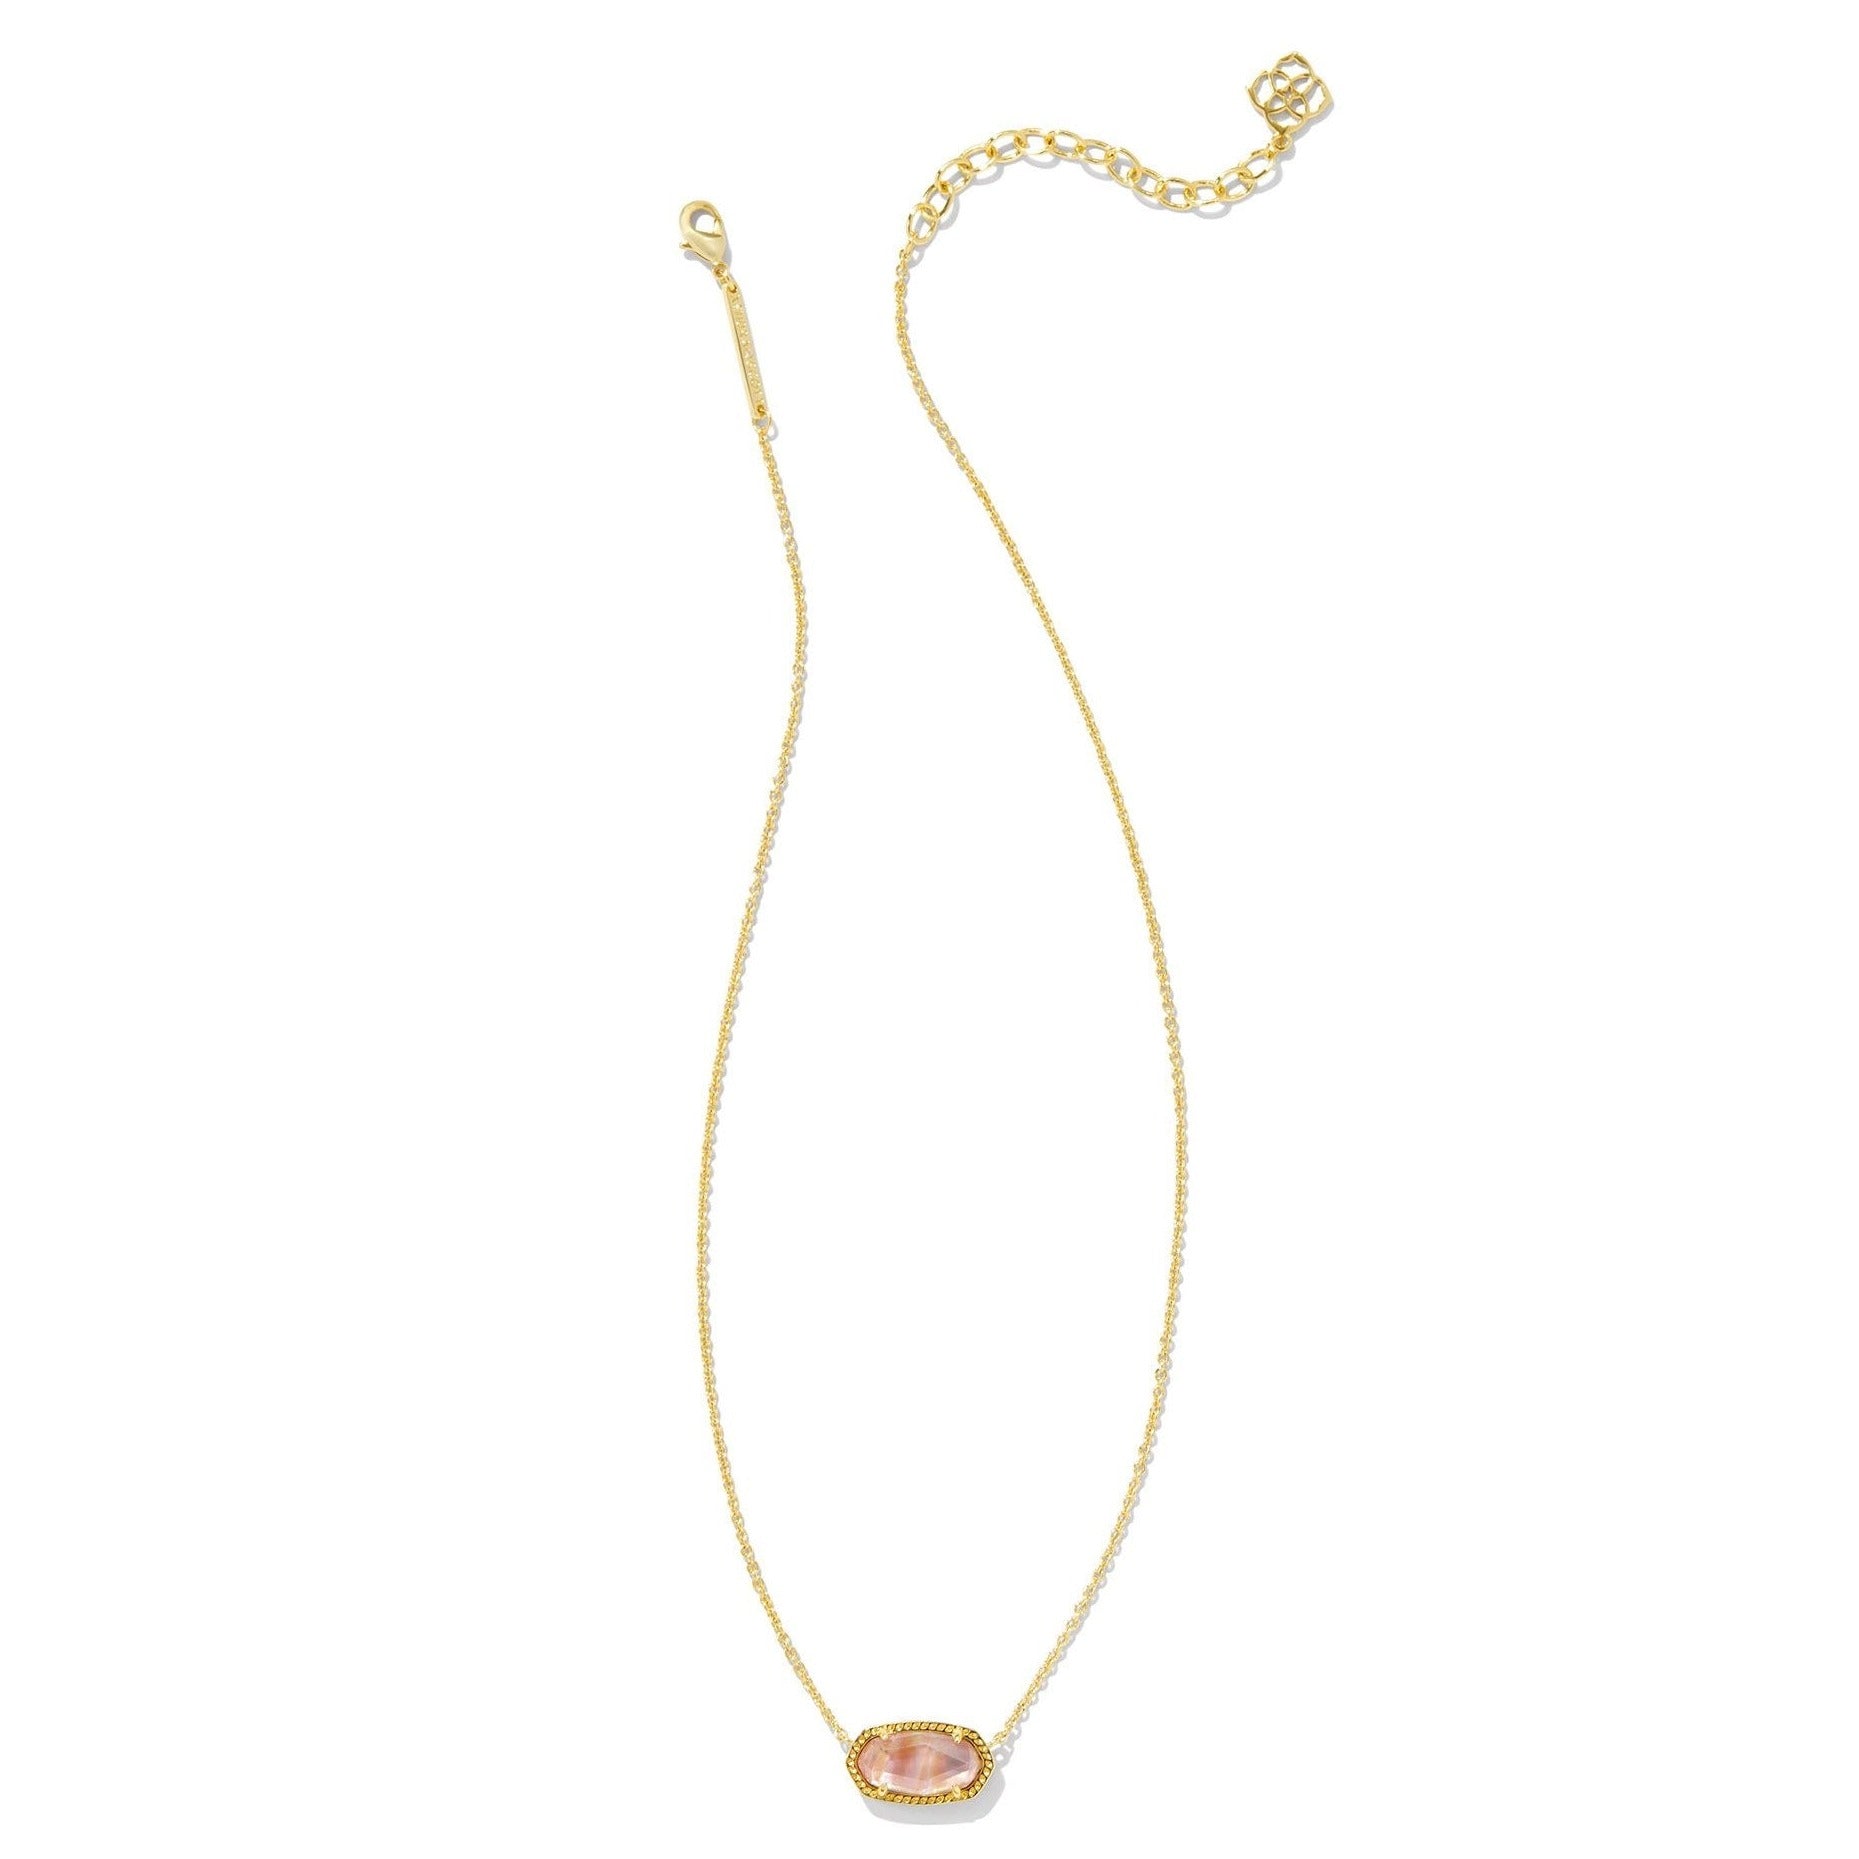 Kendra Scott | Elisa Gold Pendant Necklace in Light Pink Iridescent Abalone - Giddy Up Glamour Boutique